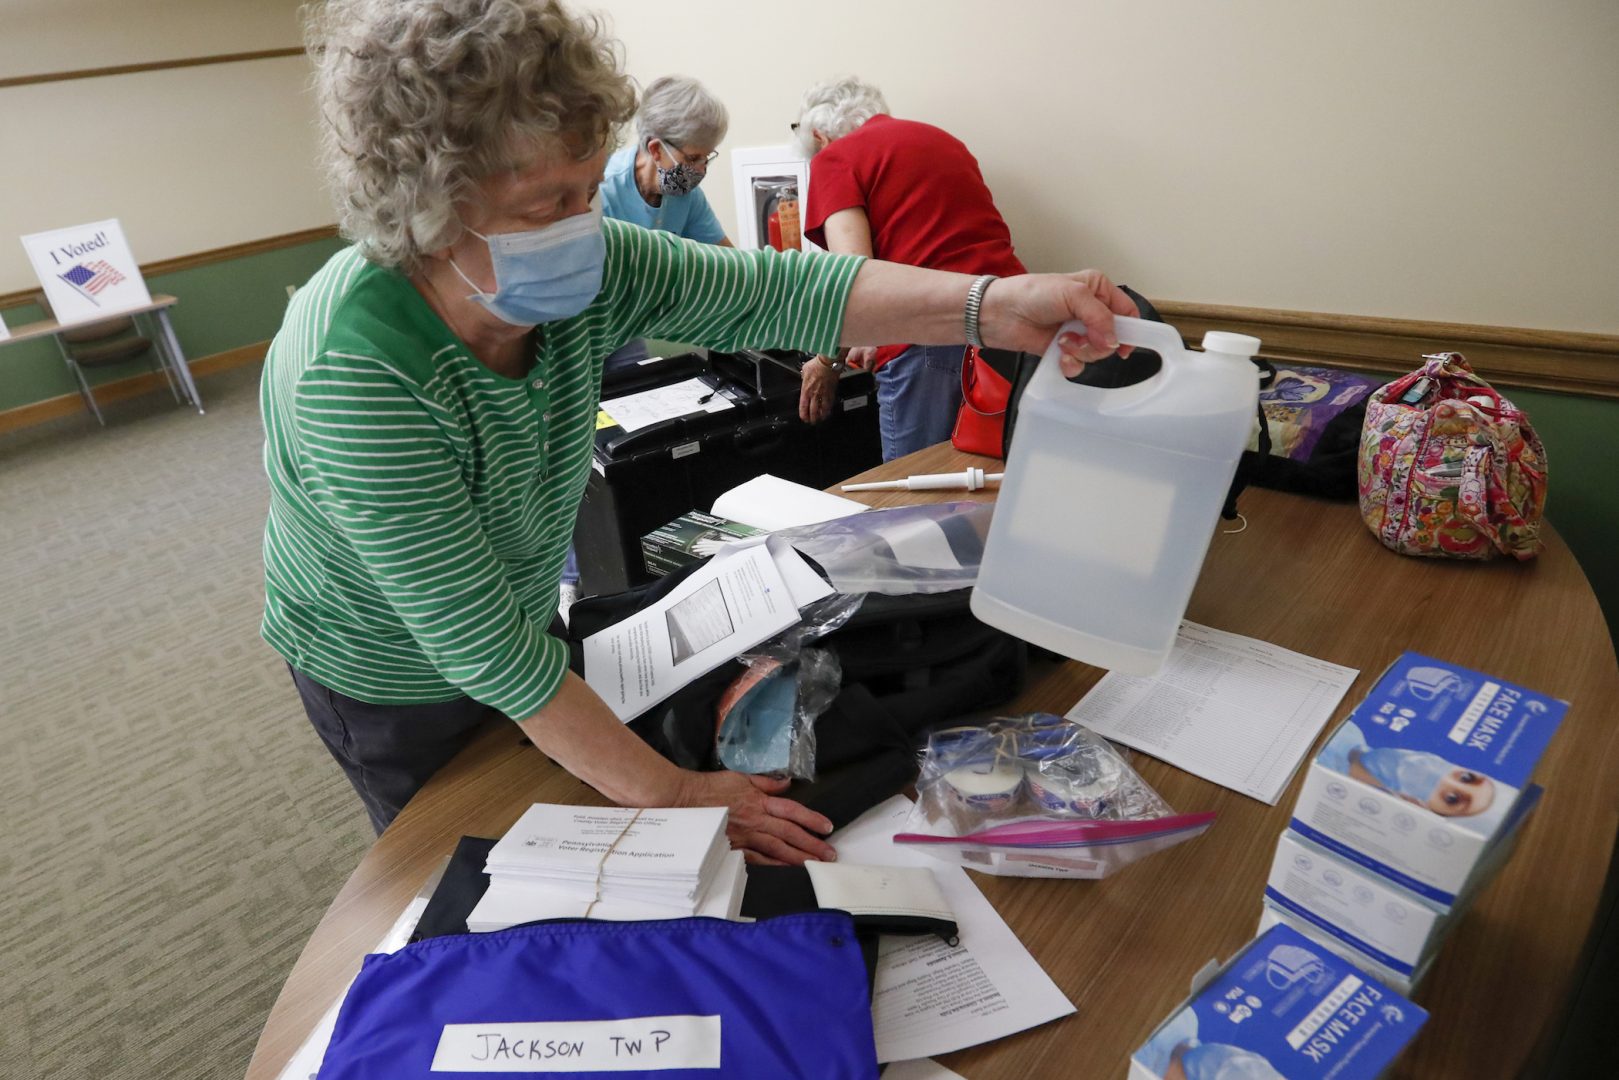 Marty Goetz, left, unpacks a bottle of alcohol from the COVID-19 prep kit as they start to set up their polling place Monday, June 1, 2020, for the voting for Tuesday's Pennsylvania primary in Jackson Township near Zelienople, Pa. (AP Photo/Keith Srakocic)